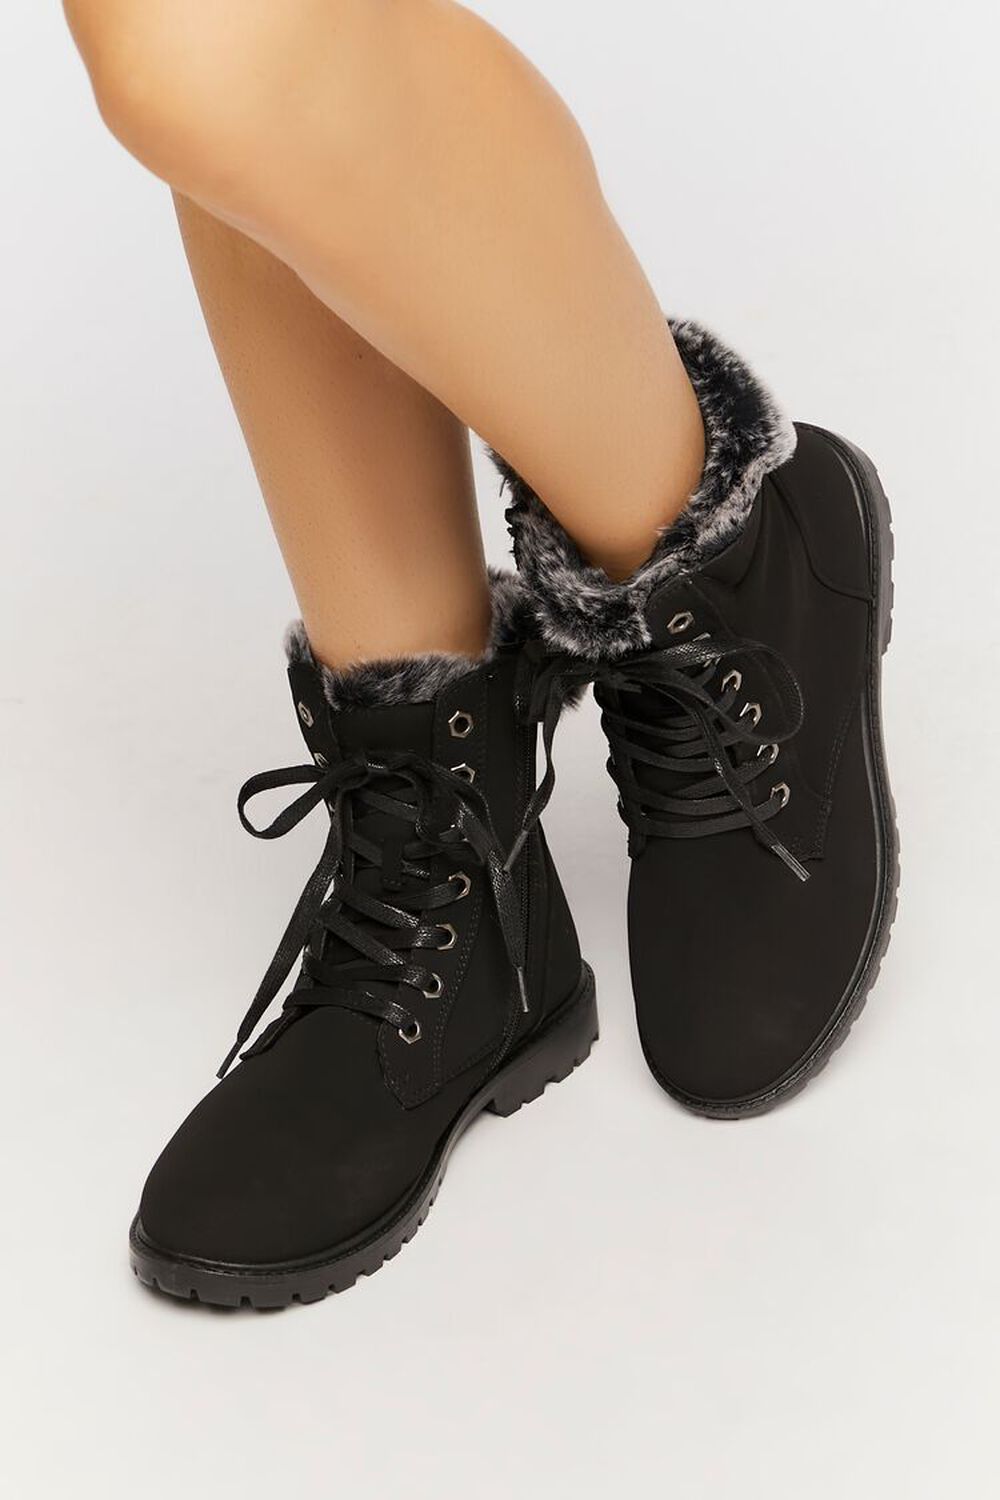 BLACK Faux Fur-Lined Ankle Booties, image 1